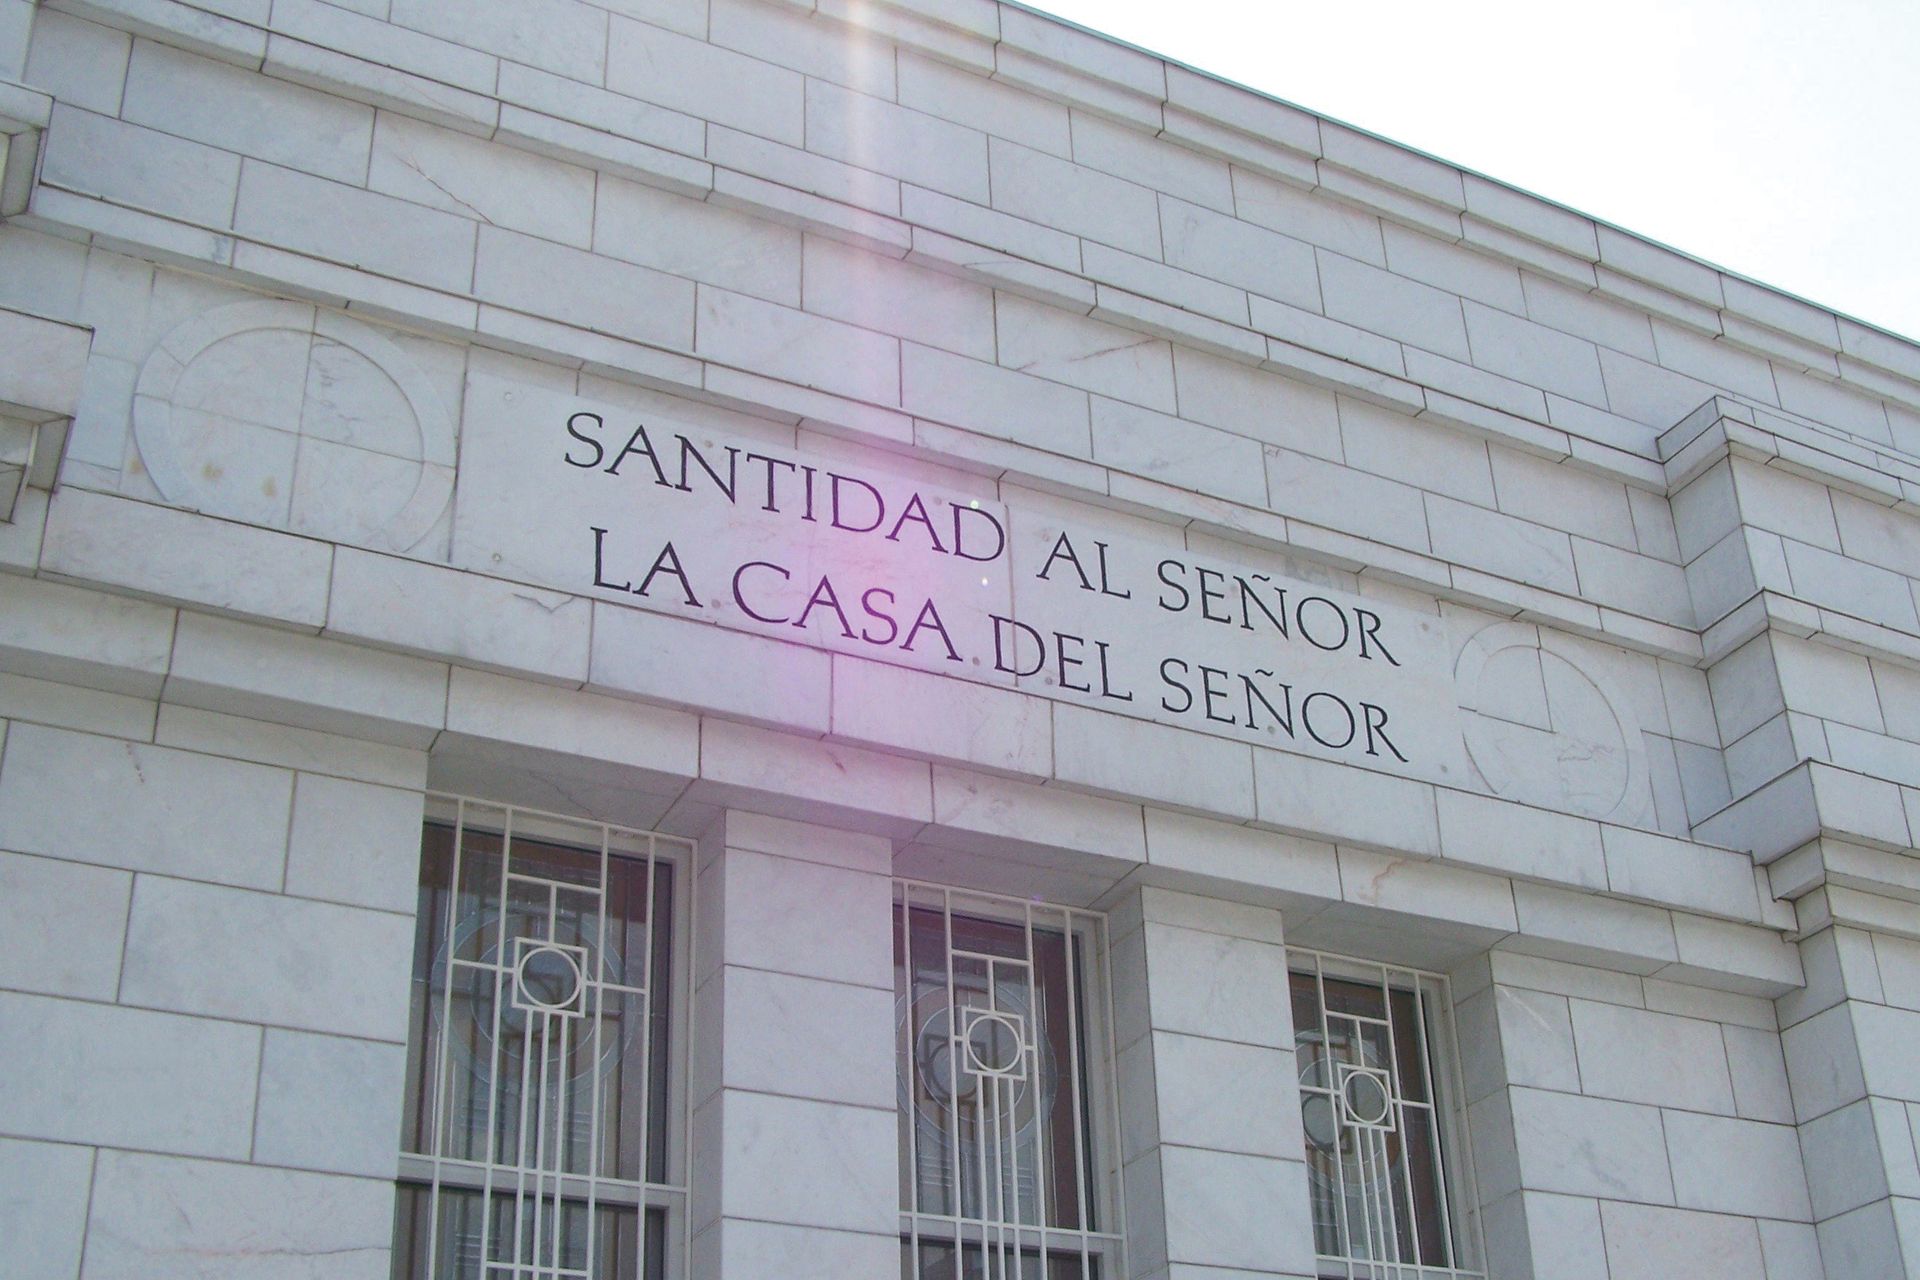 The San José Costa Rica Temple inscription, “Holiness to the Lord: The House of the Lord,” including the windows and exterior of the temple.